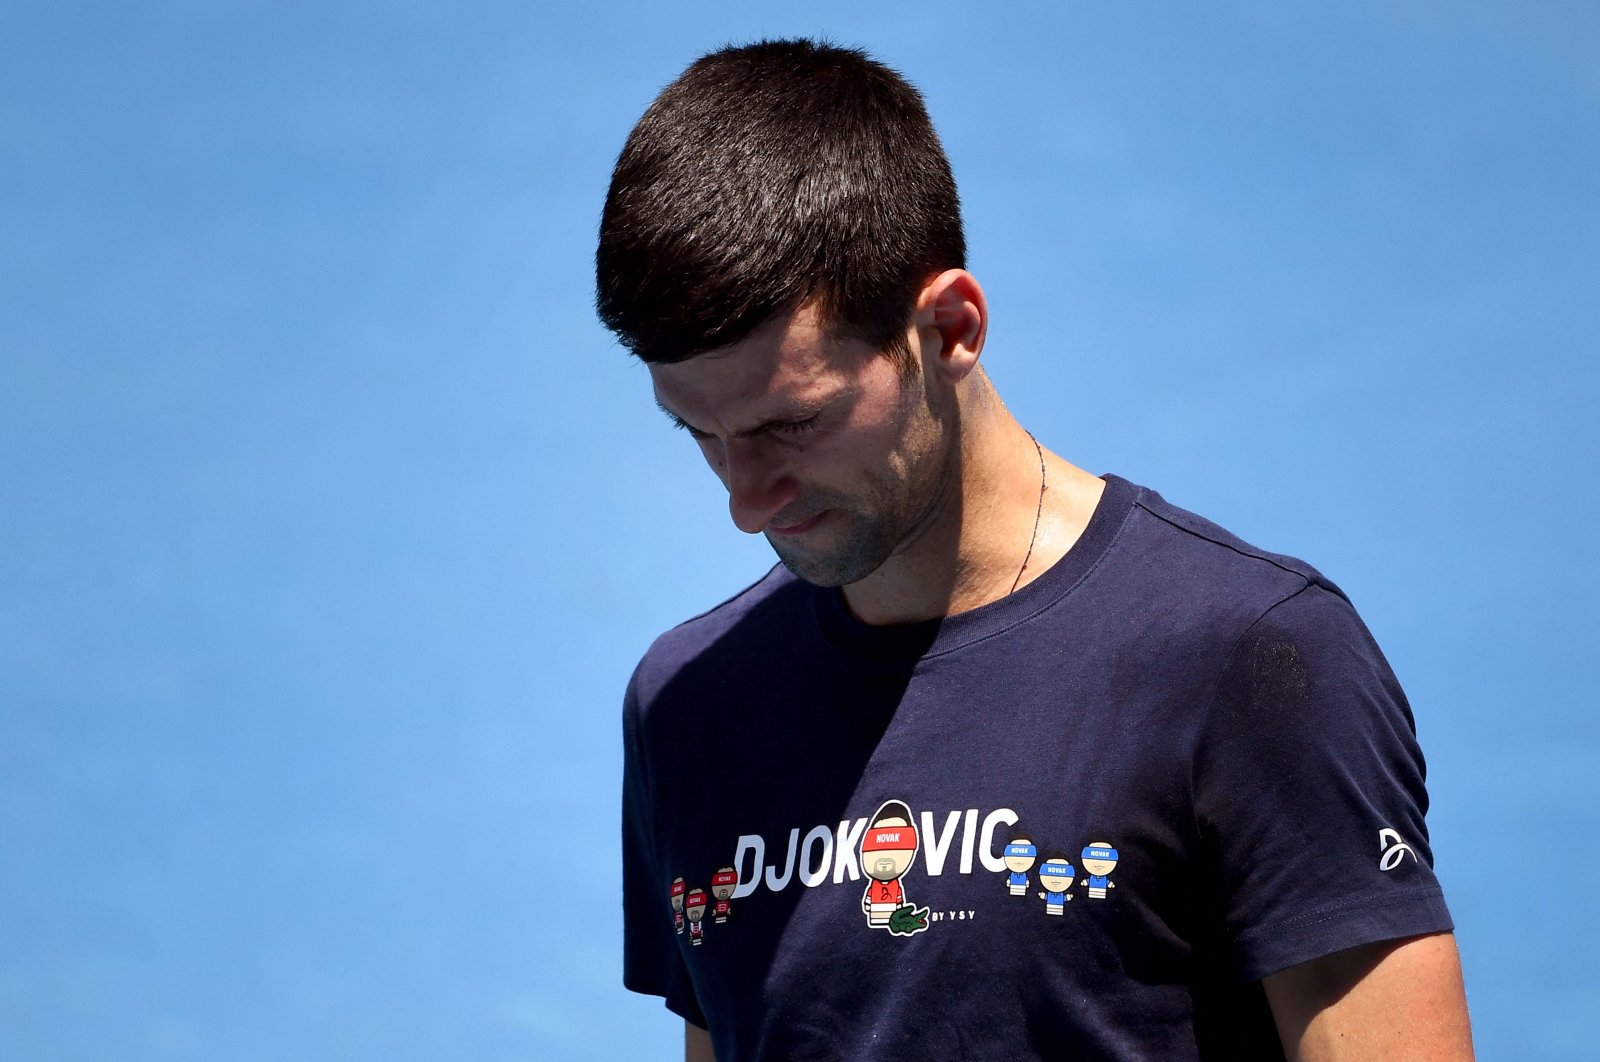 Novak Djokovic of Serbia looks at his racket during a practice session ahead of the Australian Open at the Melbourne Park tennis center, Melbourne, Australia, Jan. 12, 2022. (AFP Photo)